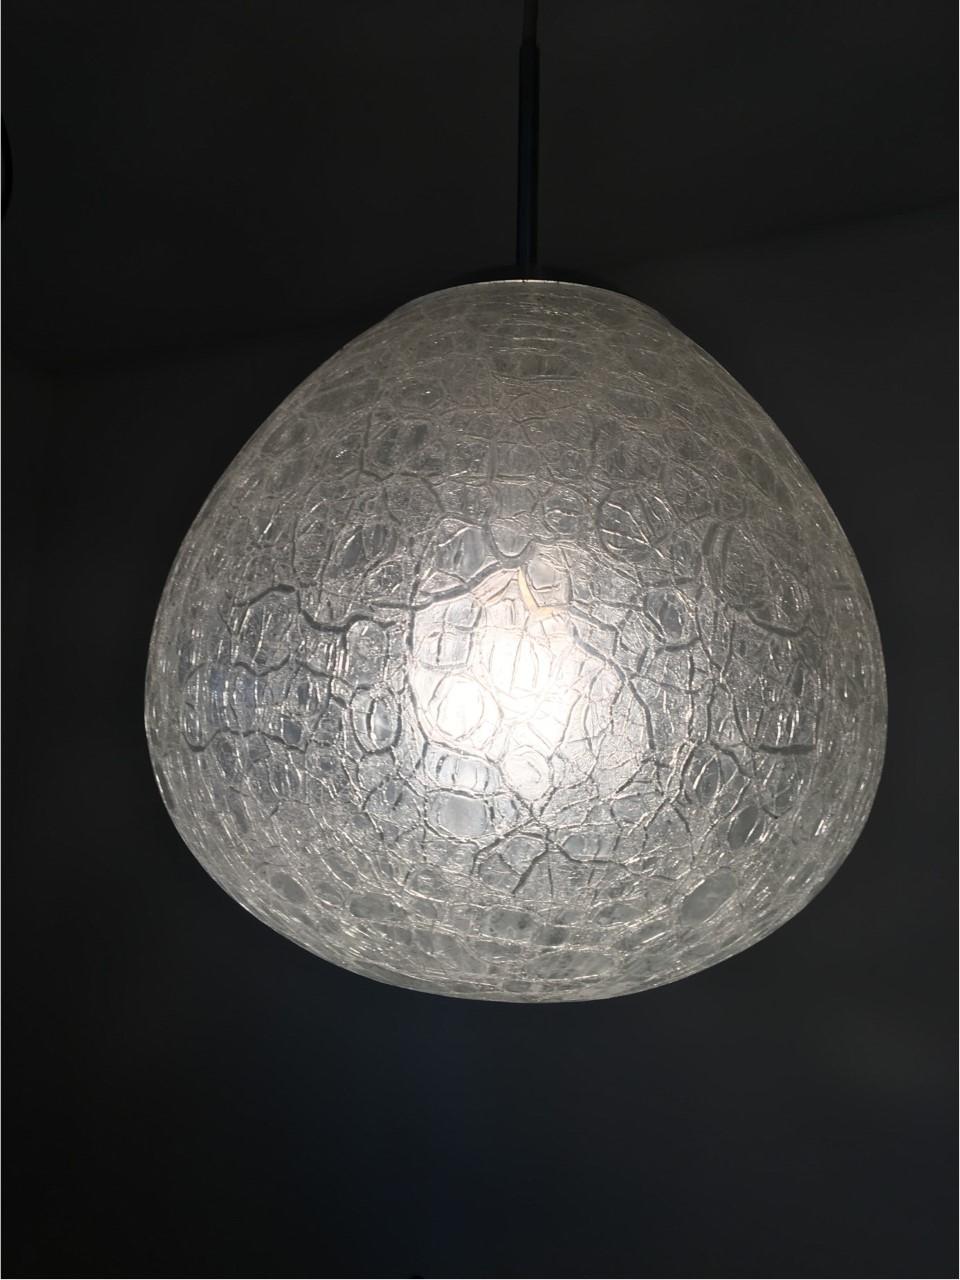 A lovely drop shaped pendant lamp by Doria from the 1960s. The German lamp manufacturer created some beautiful lamps during this time period. It has an aluminum cover and requires one European E 26 / 27 bulb for maximum lighting effect. In good